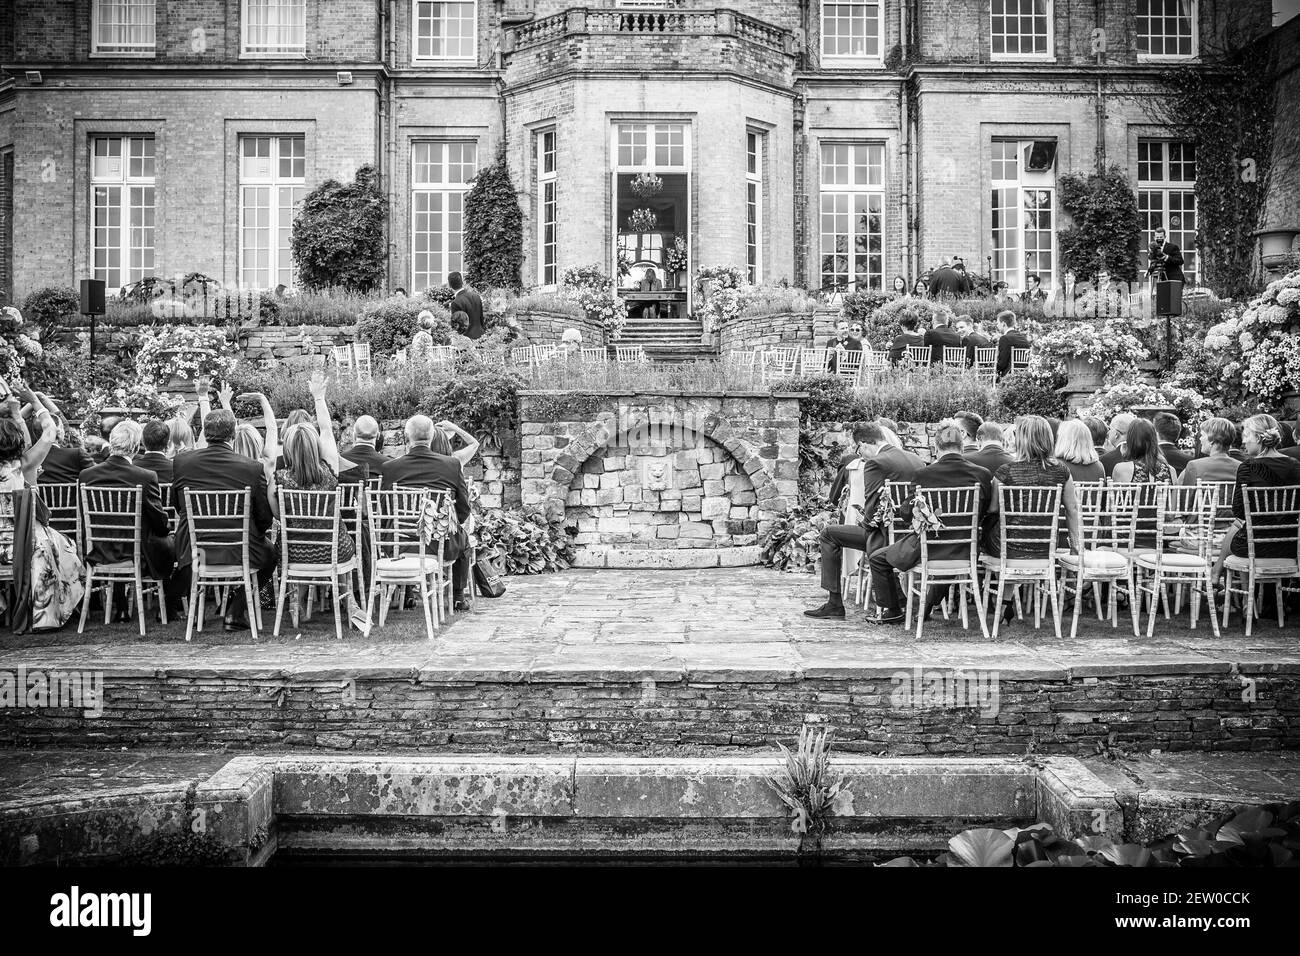 Guests seated in the grounds of a mansion house ready for the bride and groom to arrive. Stock Photo